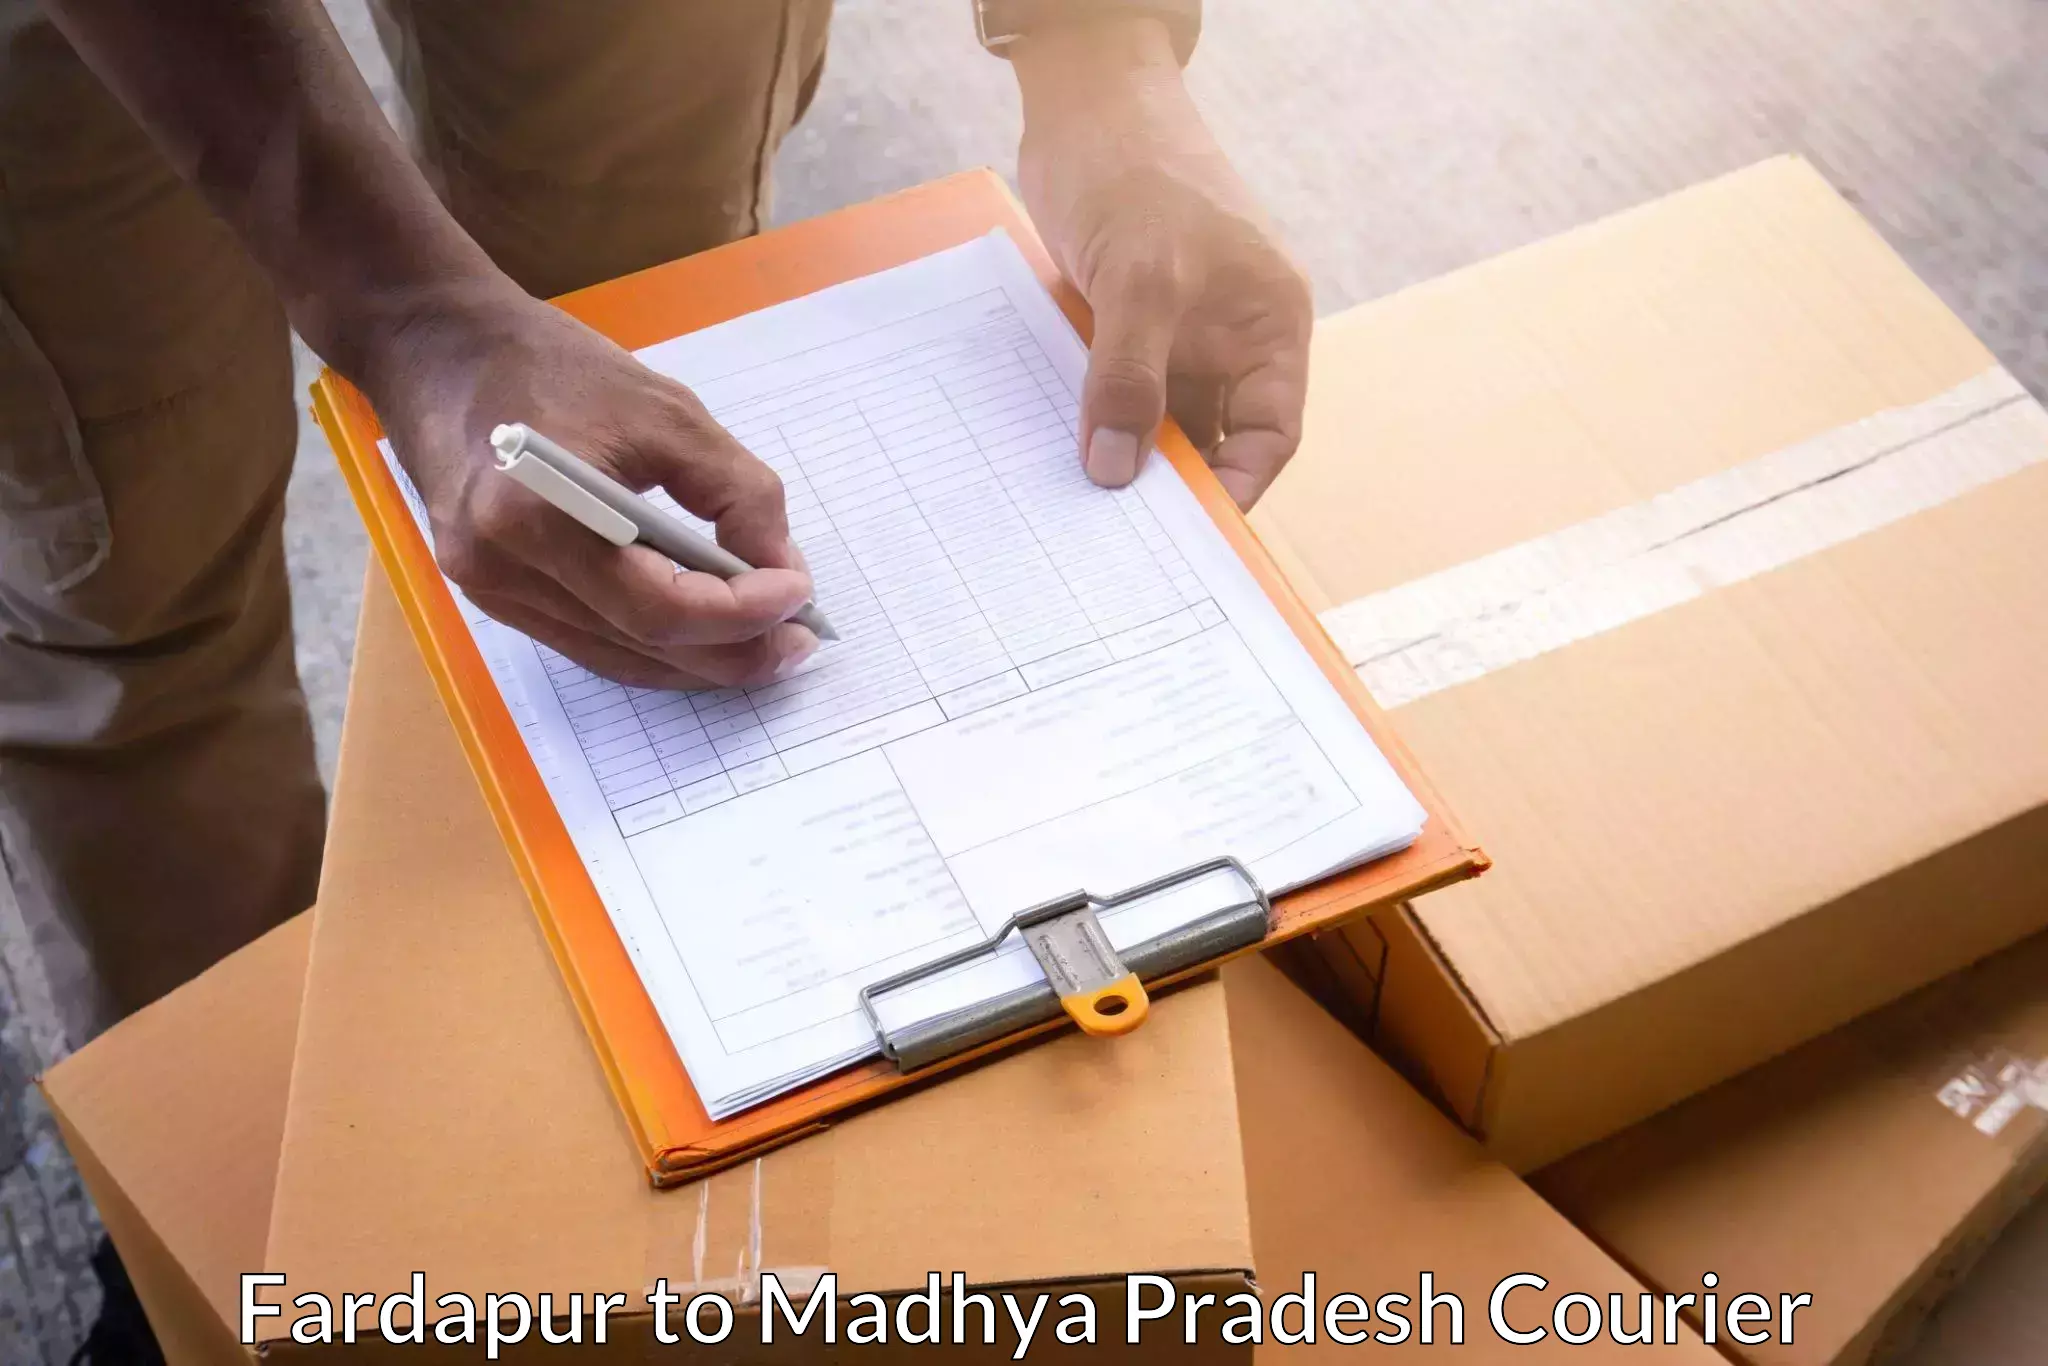 Courier service efficiency Fardapur to Bhopal